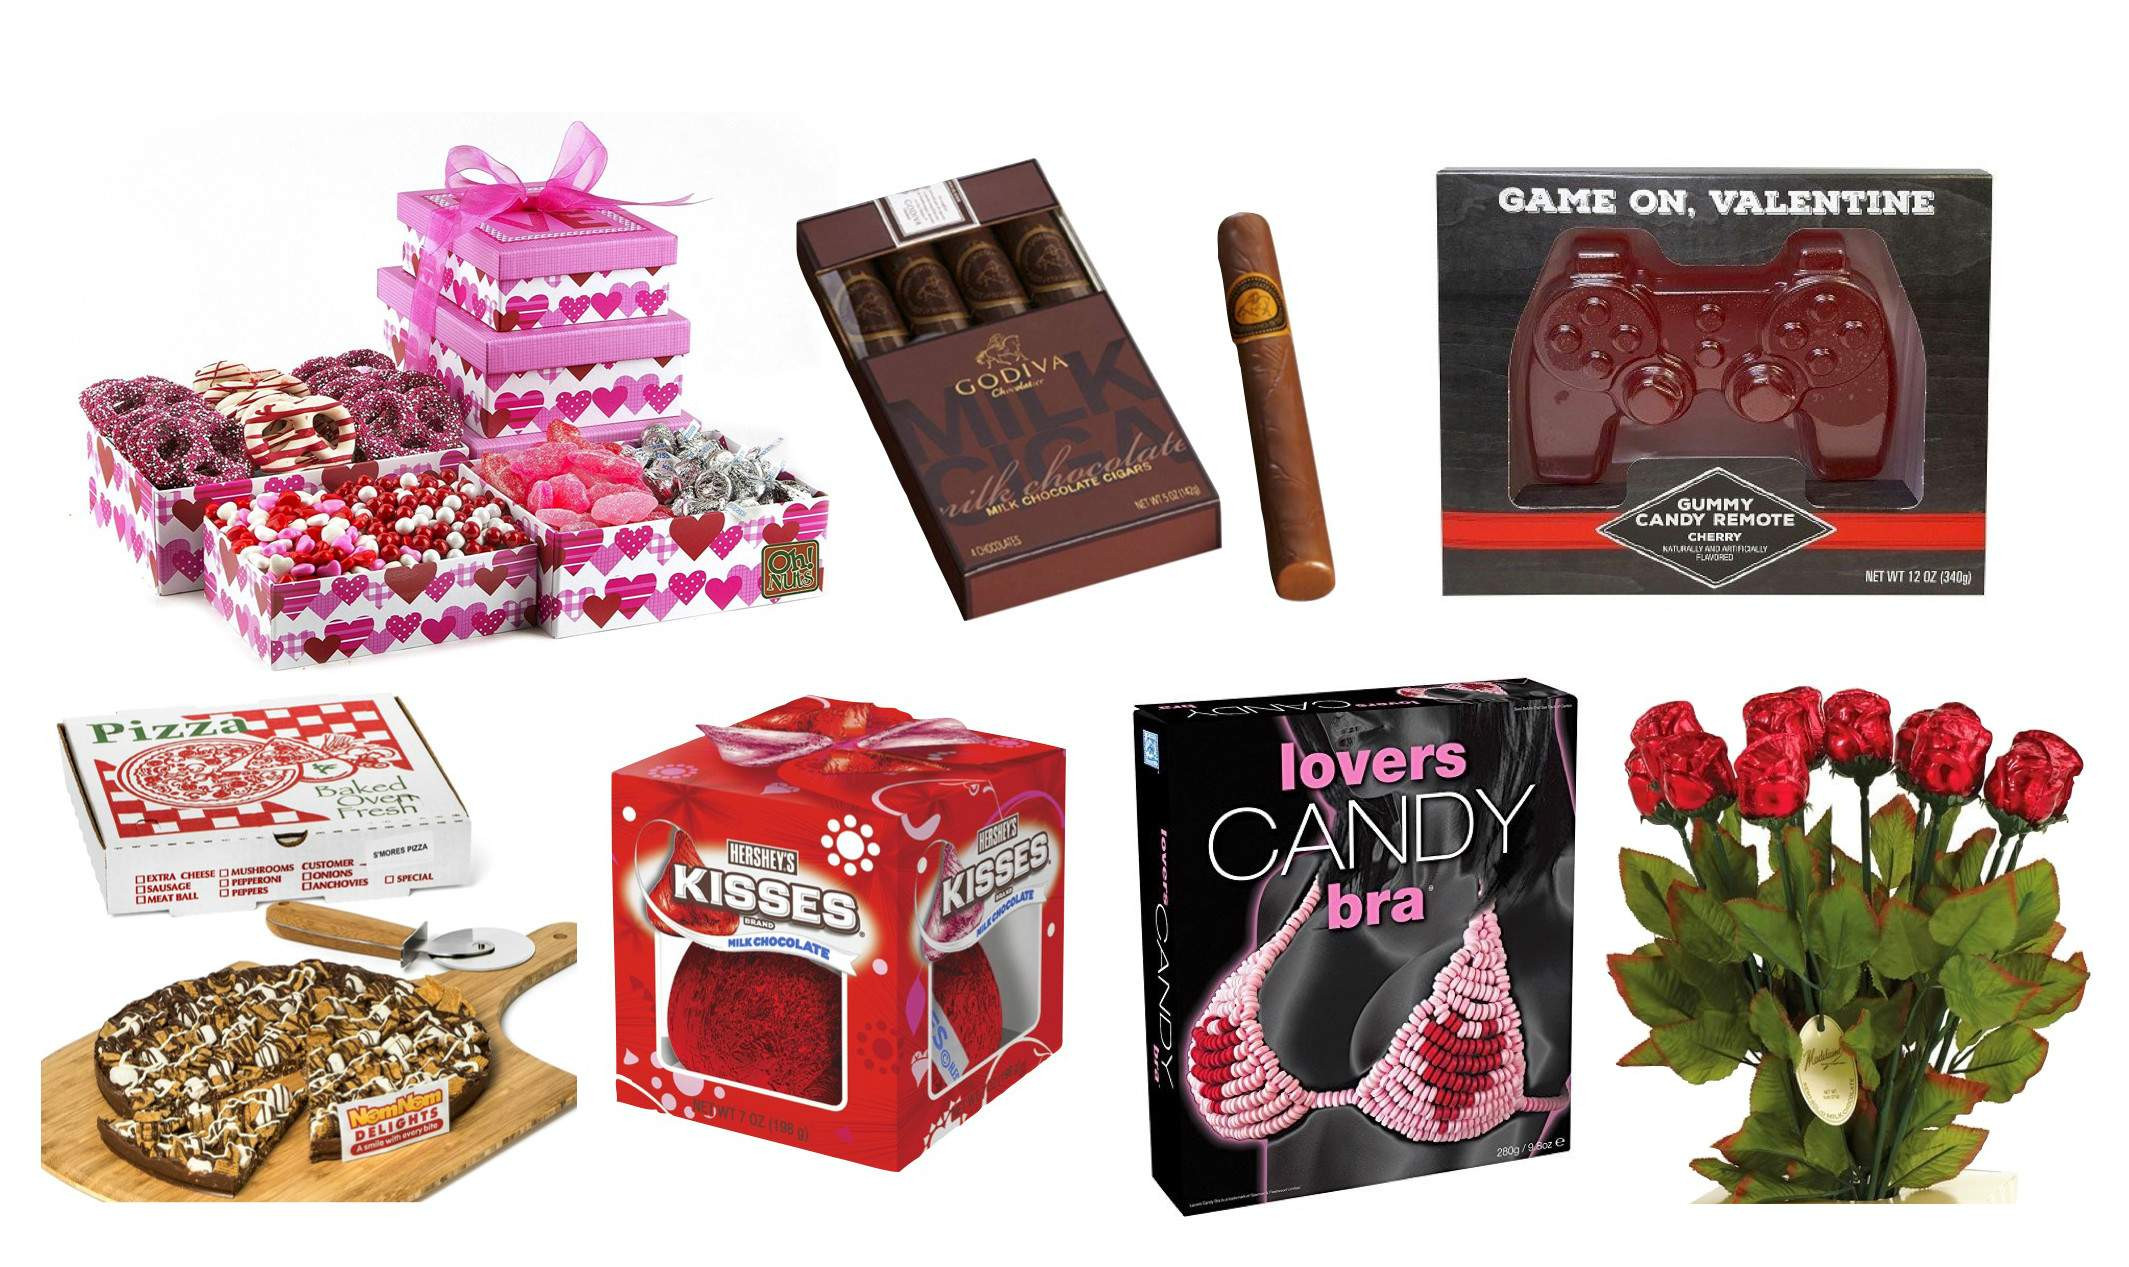 Girlfriend Valentine Gift Ideas
 Traditional Gifts for Your Girlfriend But With A Twist